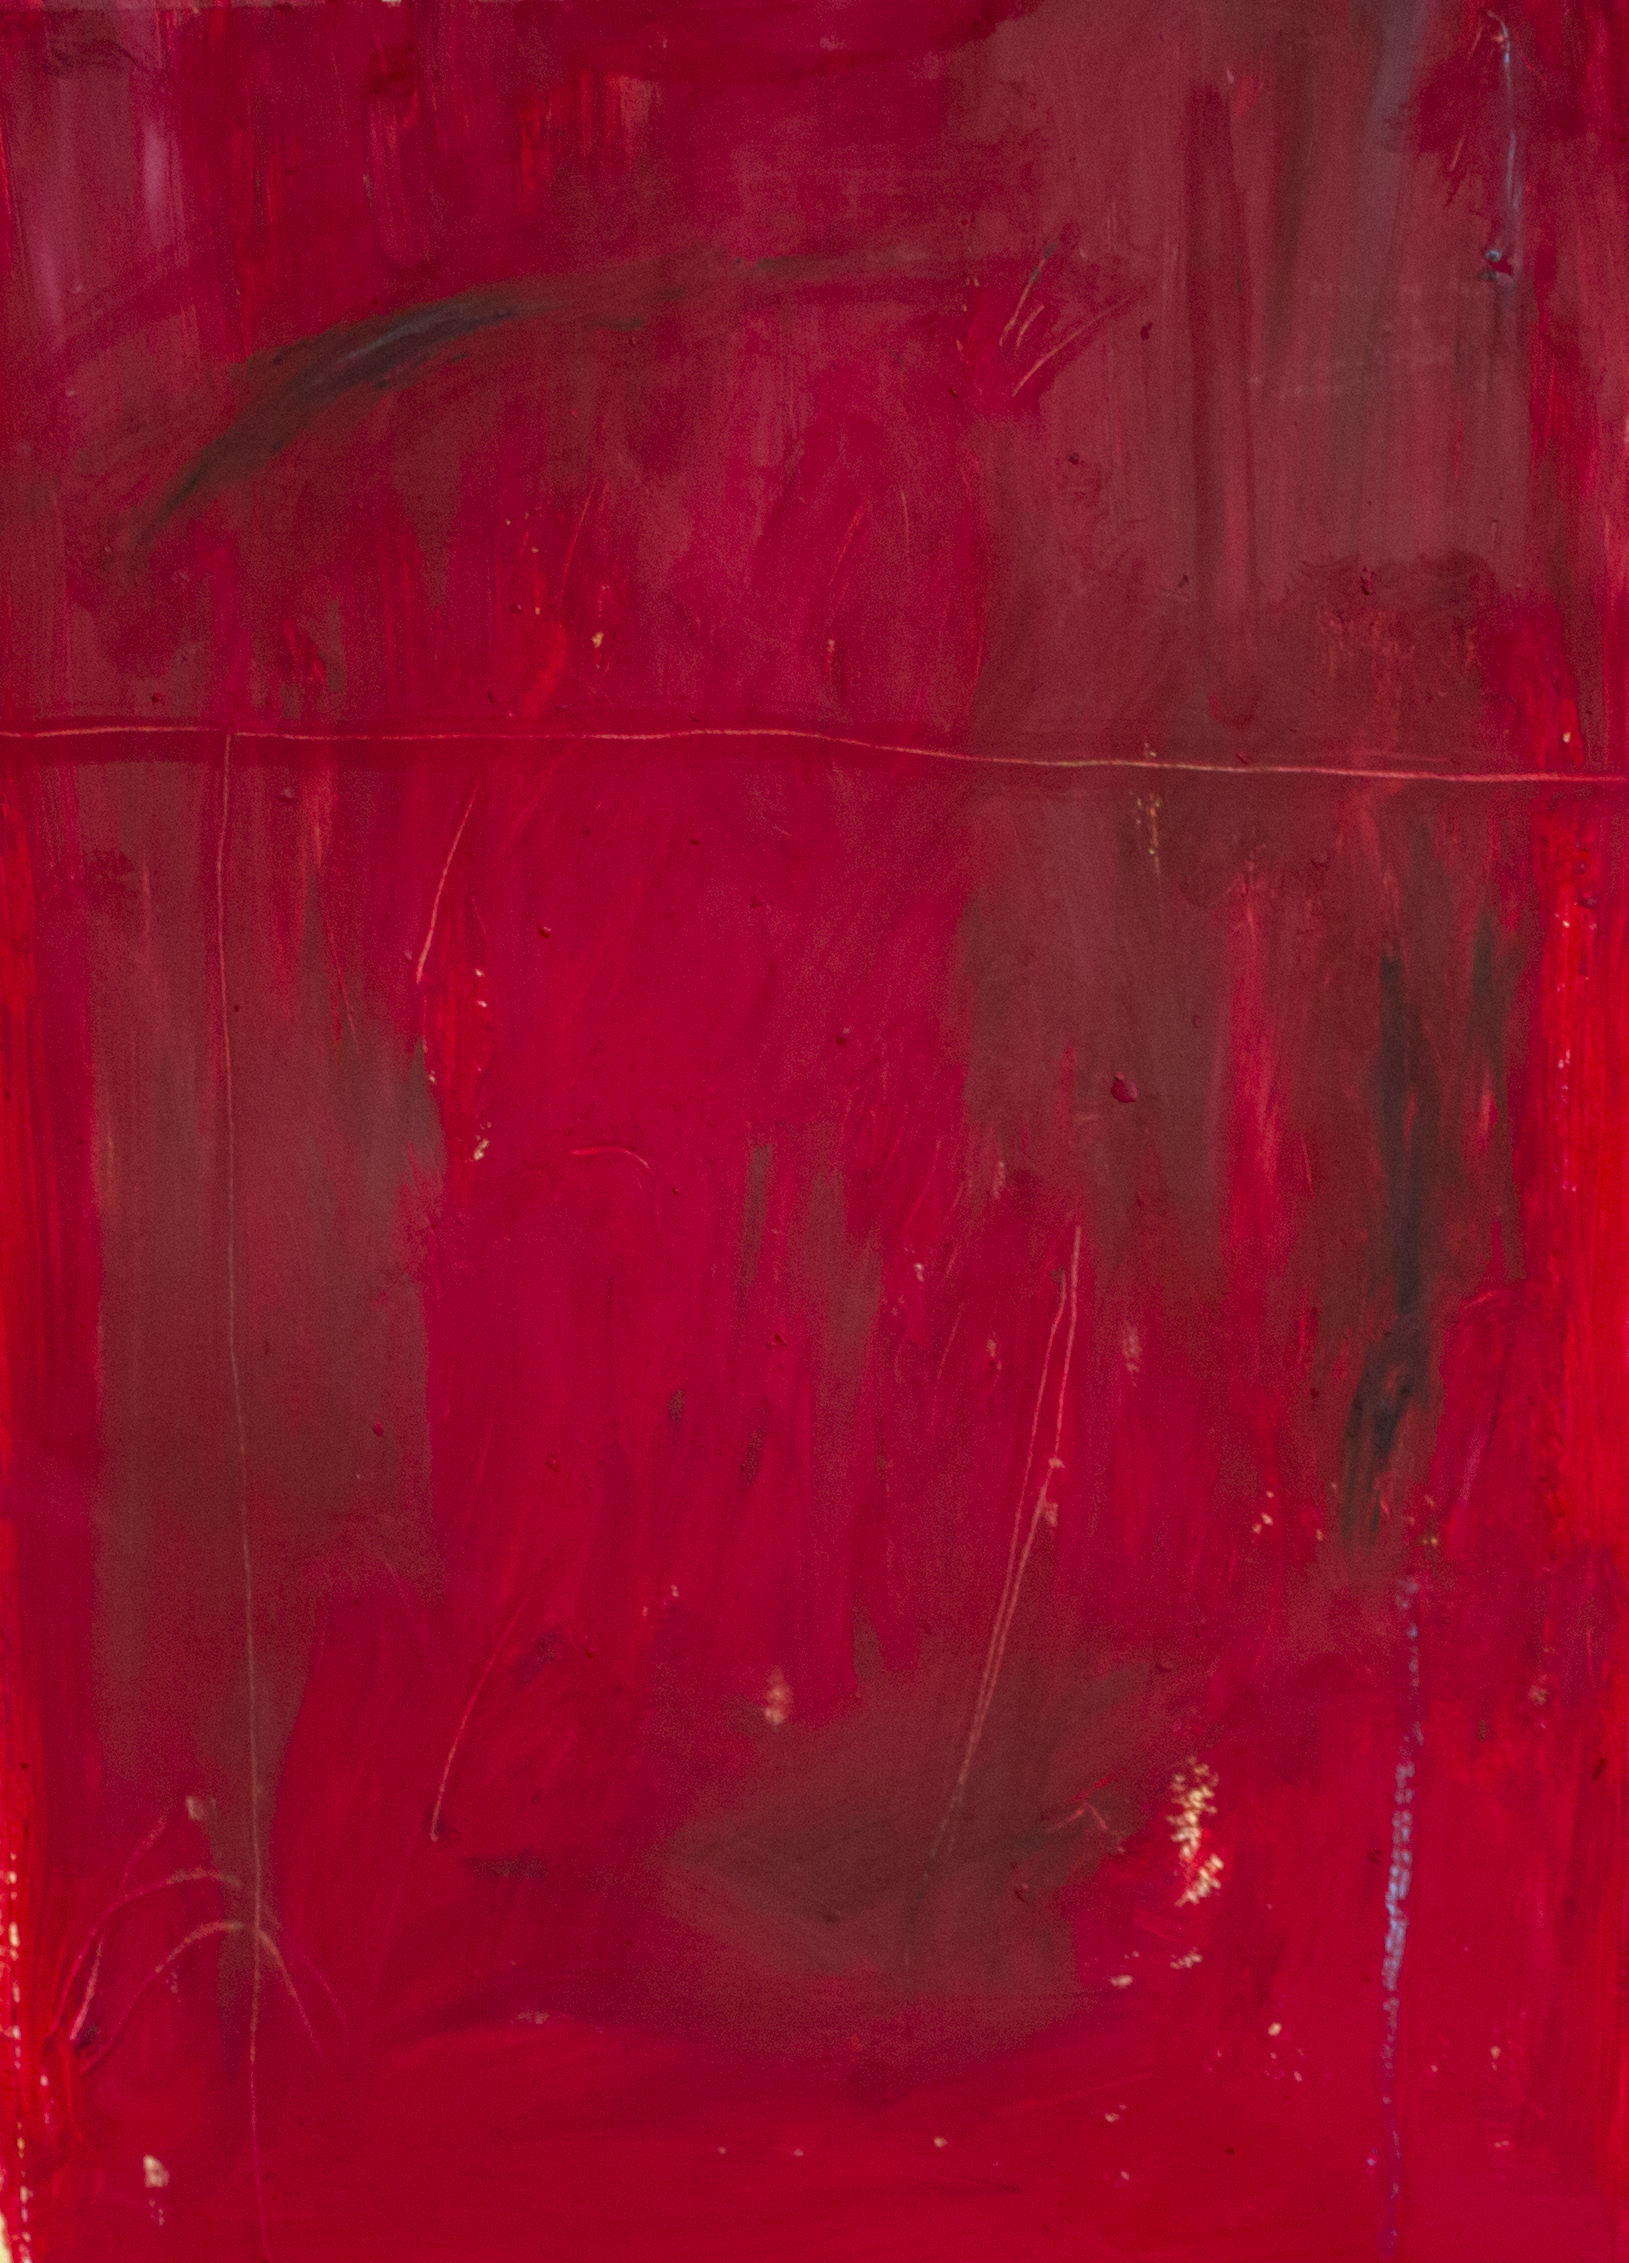   Hell in the Autumn , 2015  24 x 18 inches  OIl Stick, Pastel, Charcoal, and Acrylic on Paper  Private Collection 